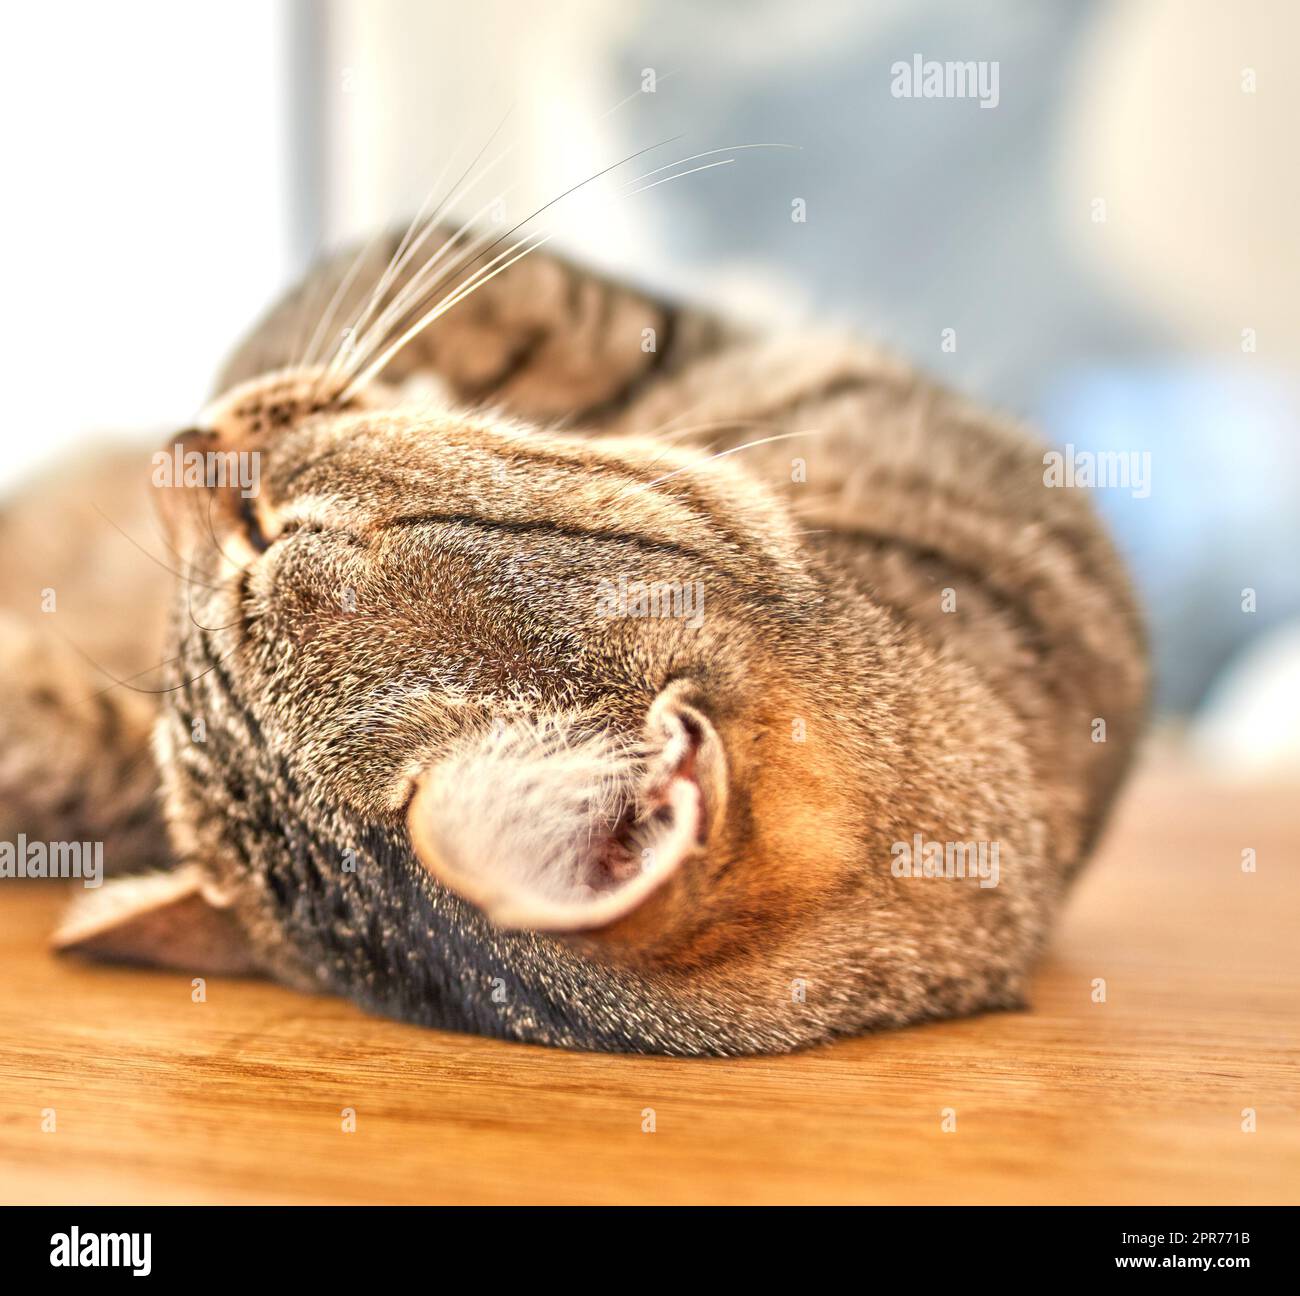 Cute grey tabby cat lying on the floor with his eyes closed. Closeup of a feline with long whiskers, sleeping or resting on wooden surface at home. Purring cat on his back dreaming about being petted Stock Photo